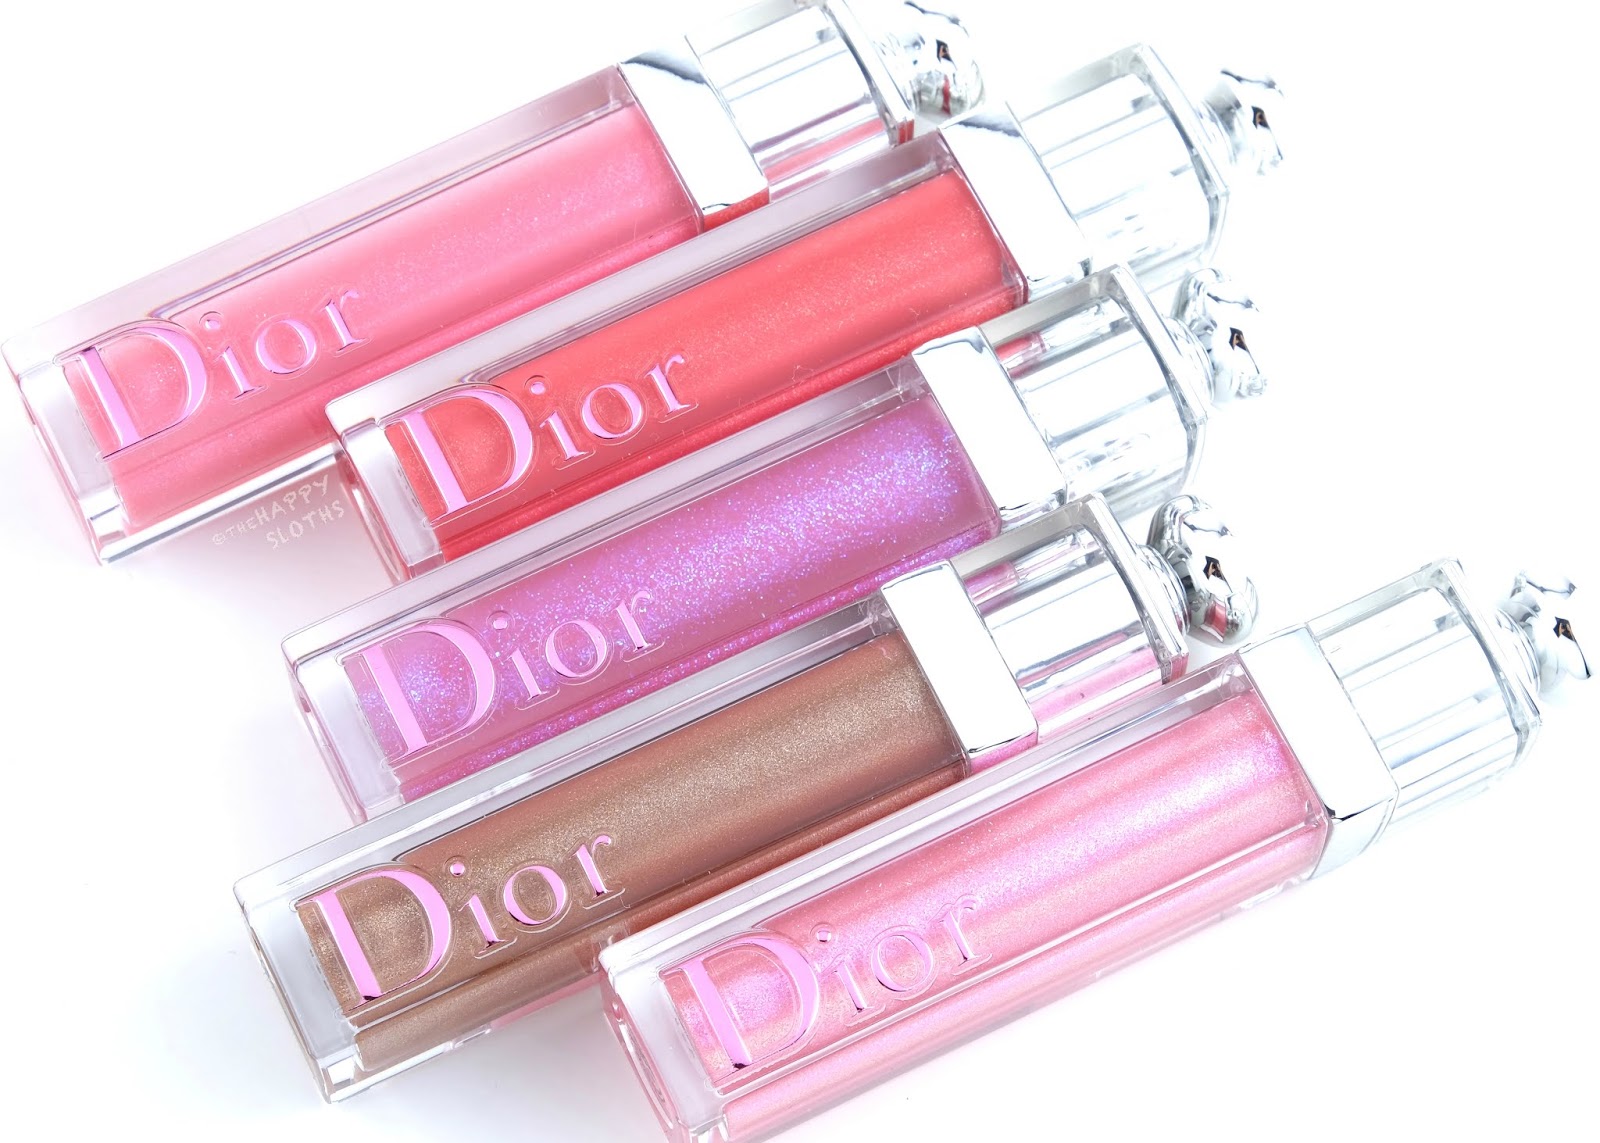 Dior | Dior Addict Stellar Lip Gloss: Review and Swatches